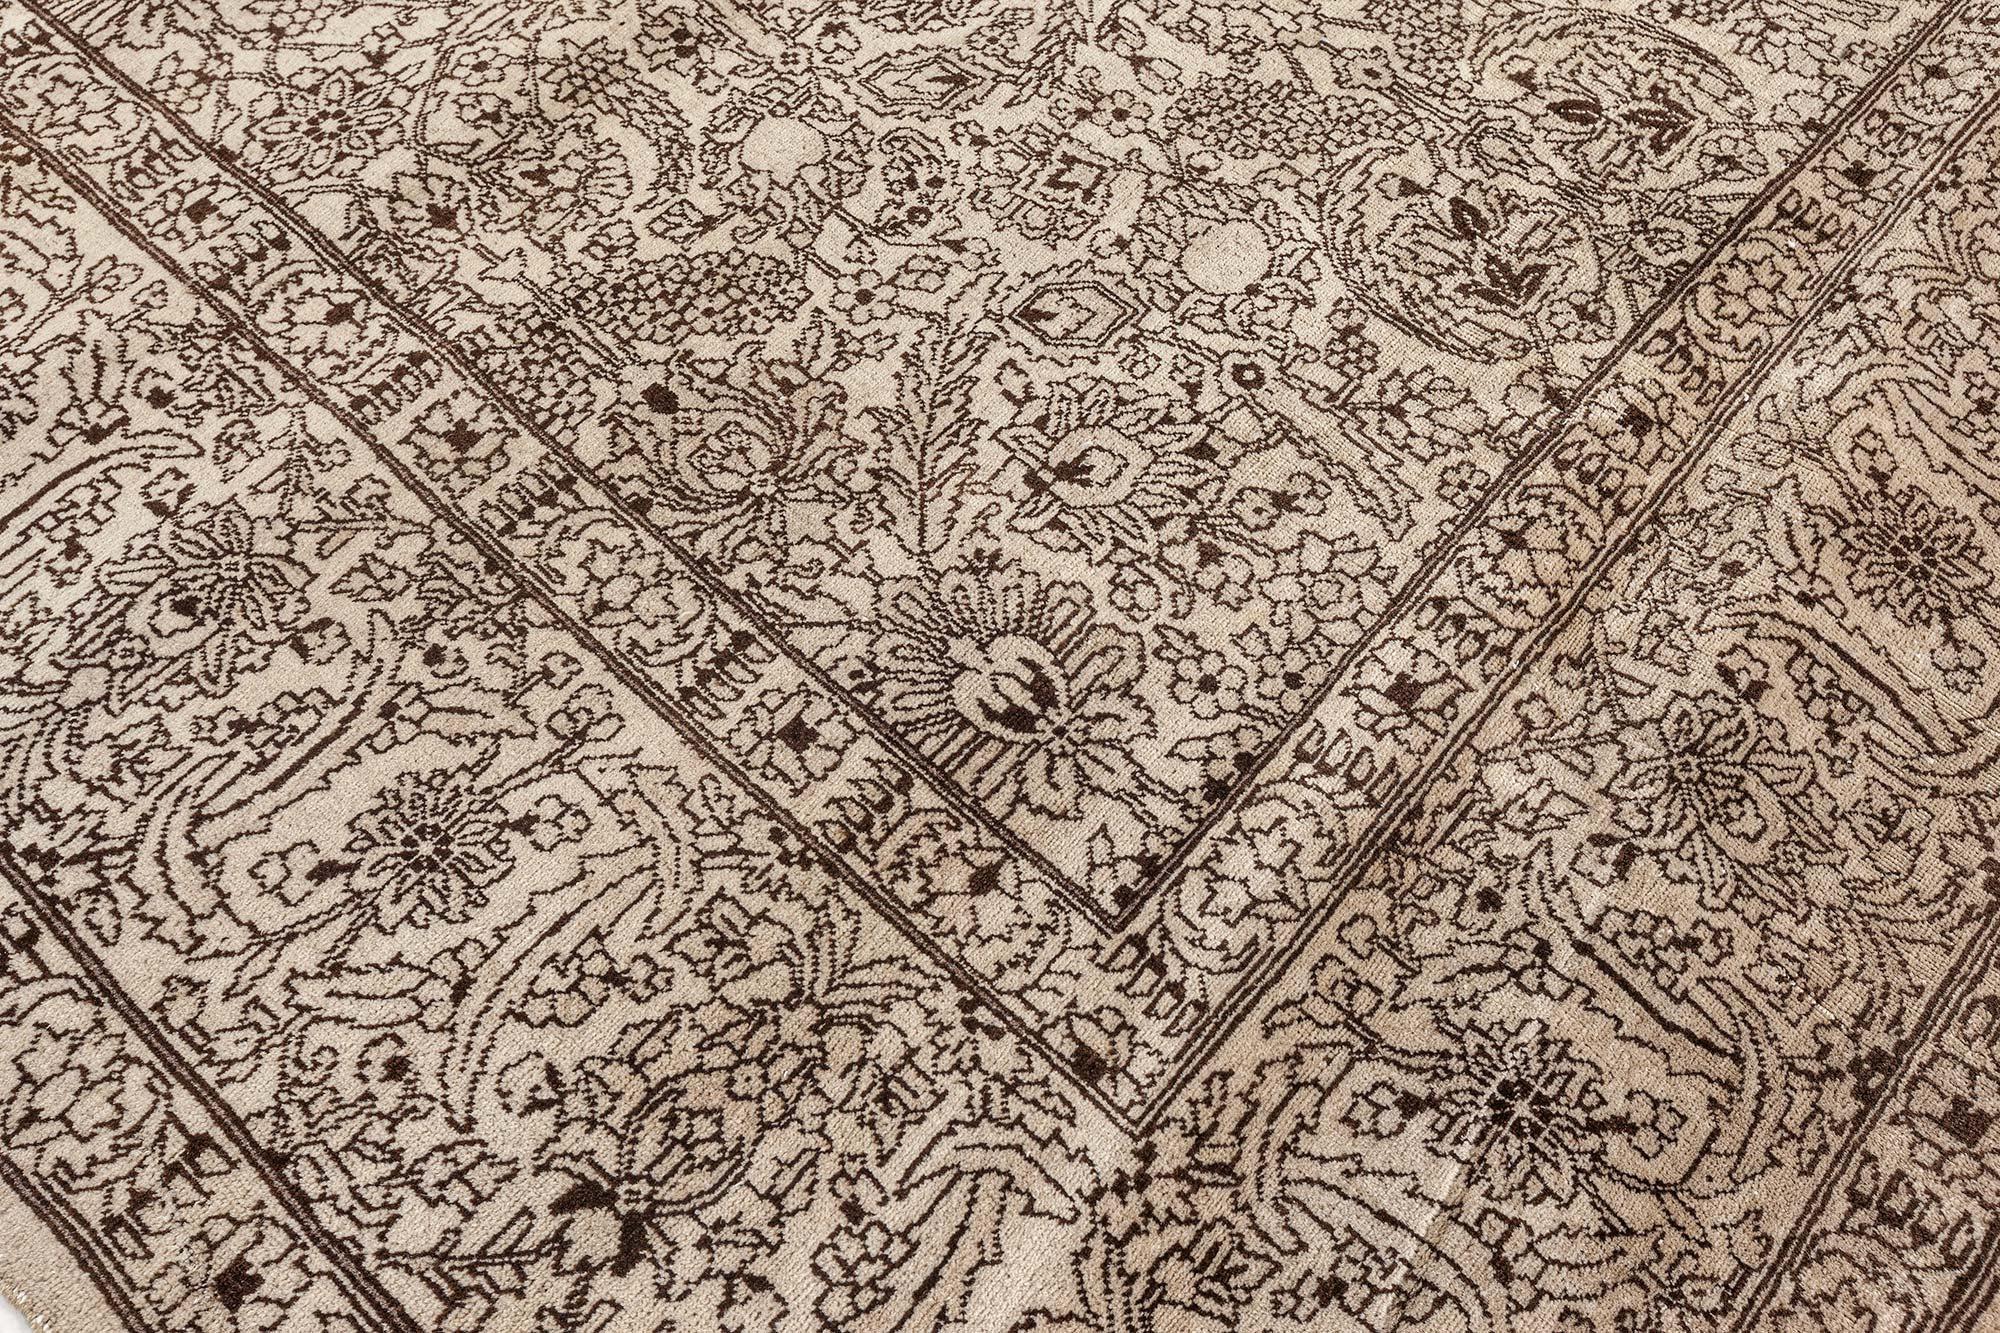 Antique Persian Tabriz Beige and Brown Rug In Good Condition For Sale In New York, NY